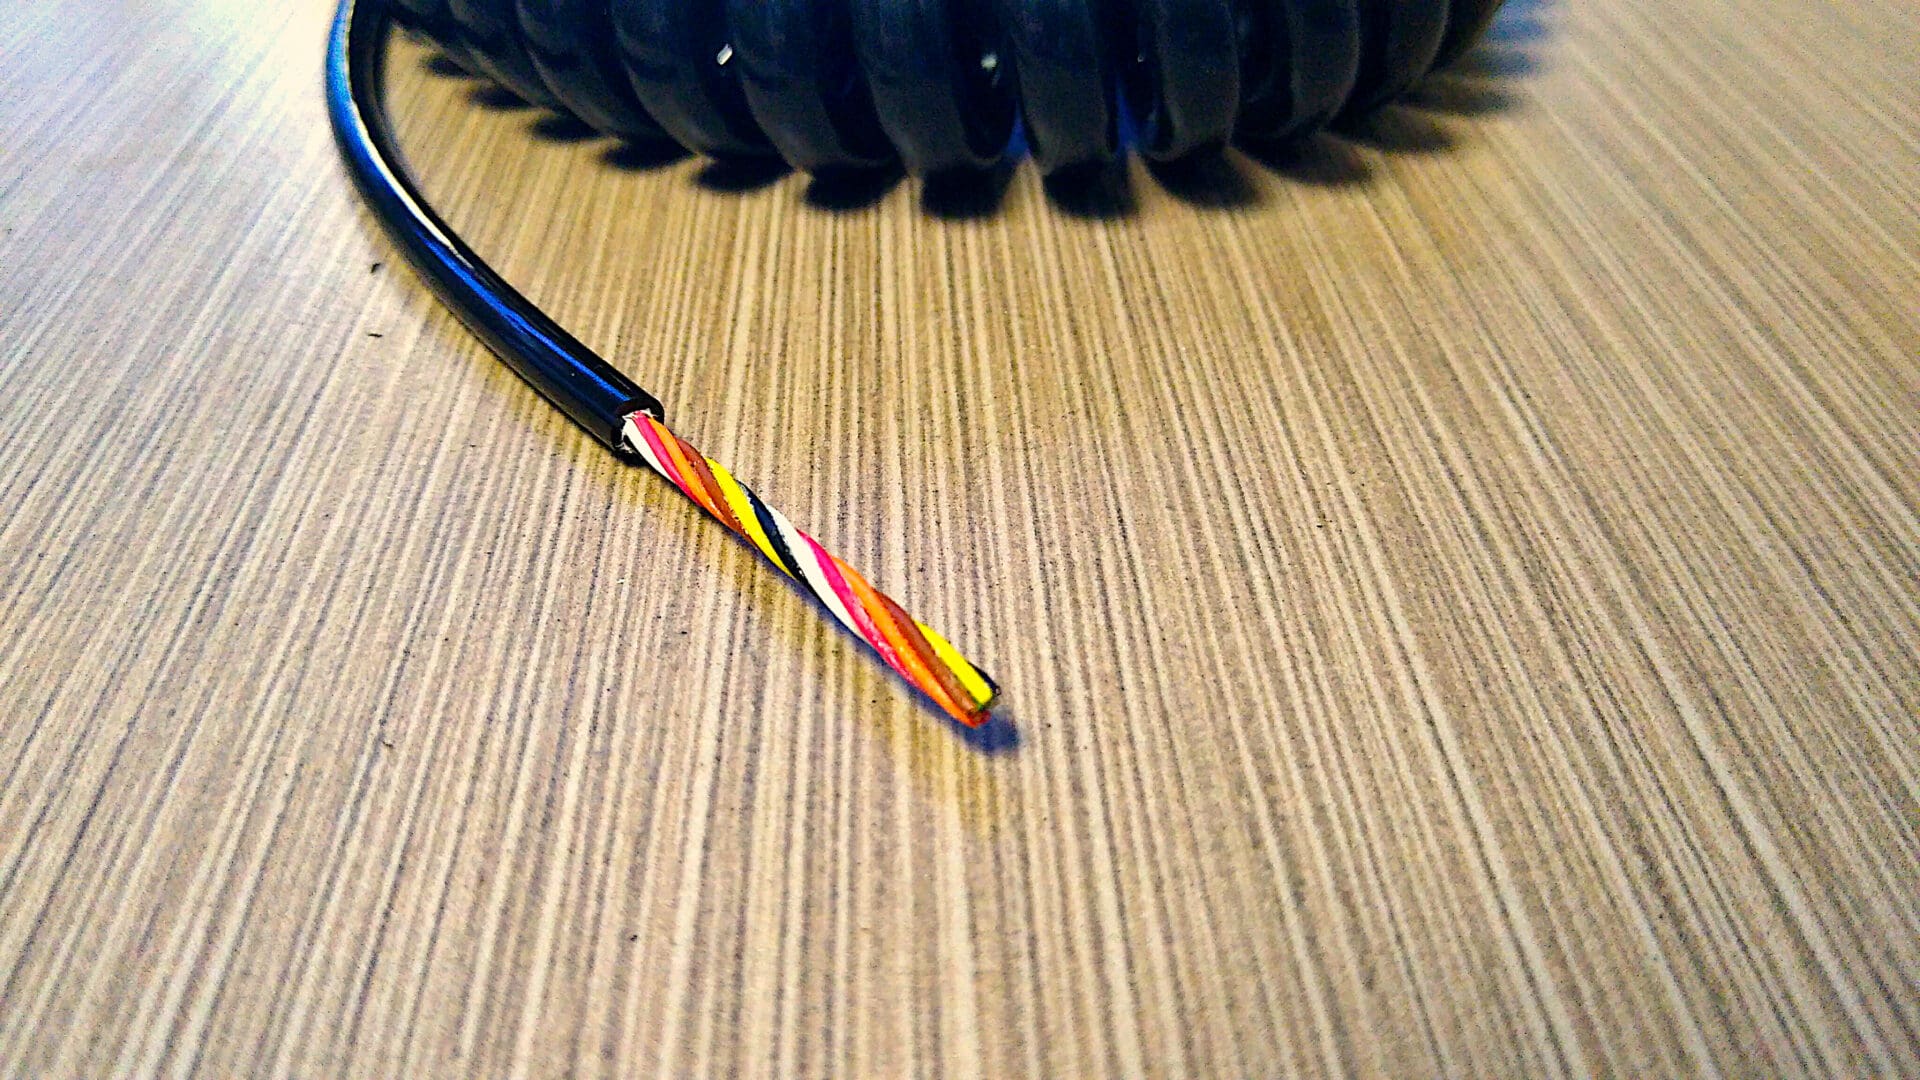 A EC287 - Electronic Coiled Cord 28 Gauge with 7 Conductors - Non-Shielded is sitting on a table.